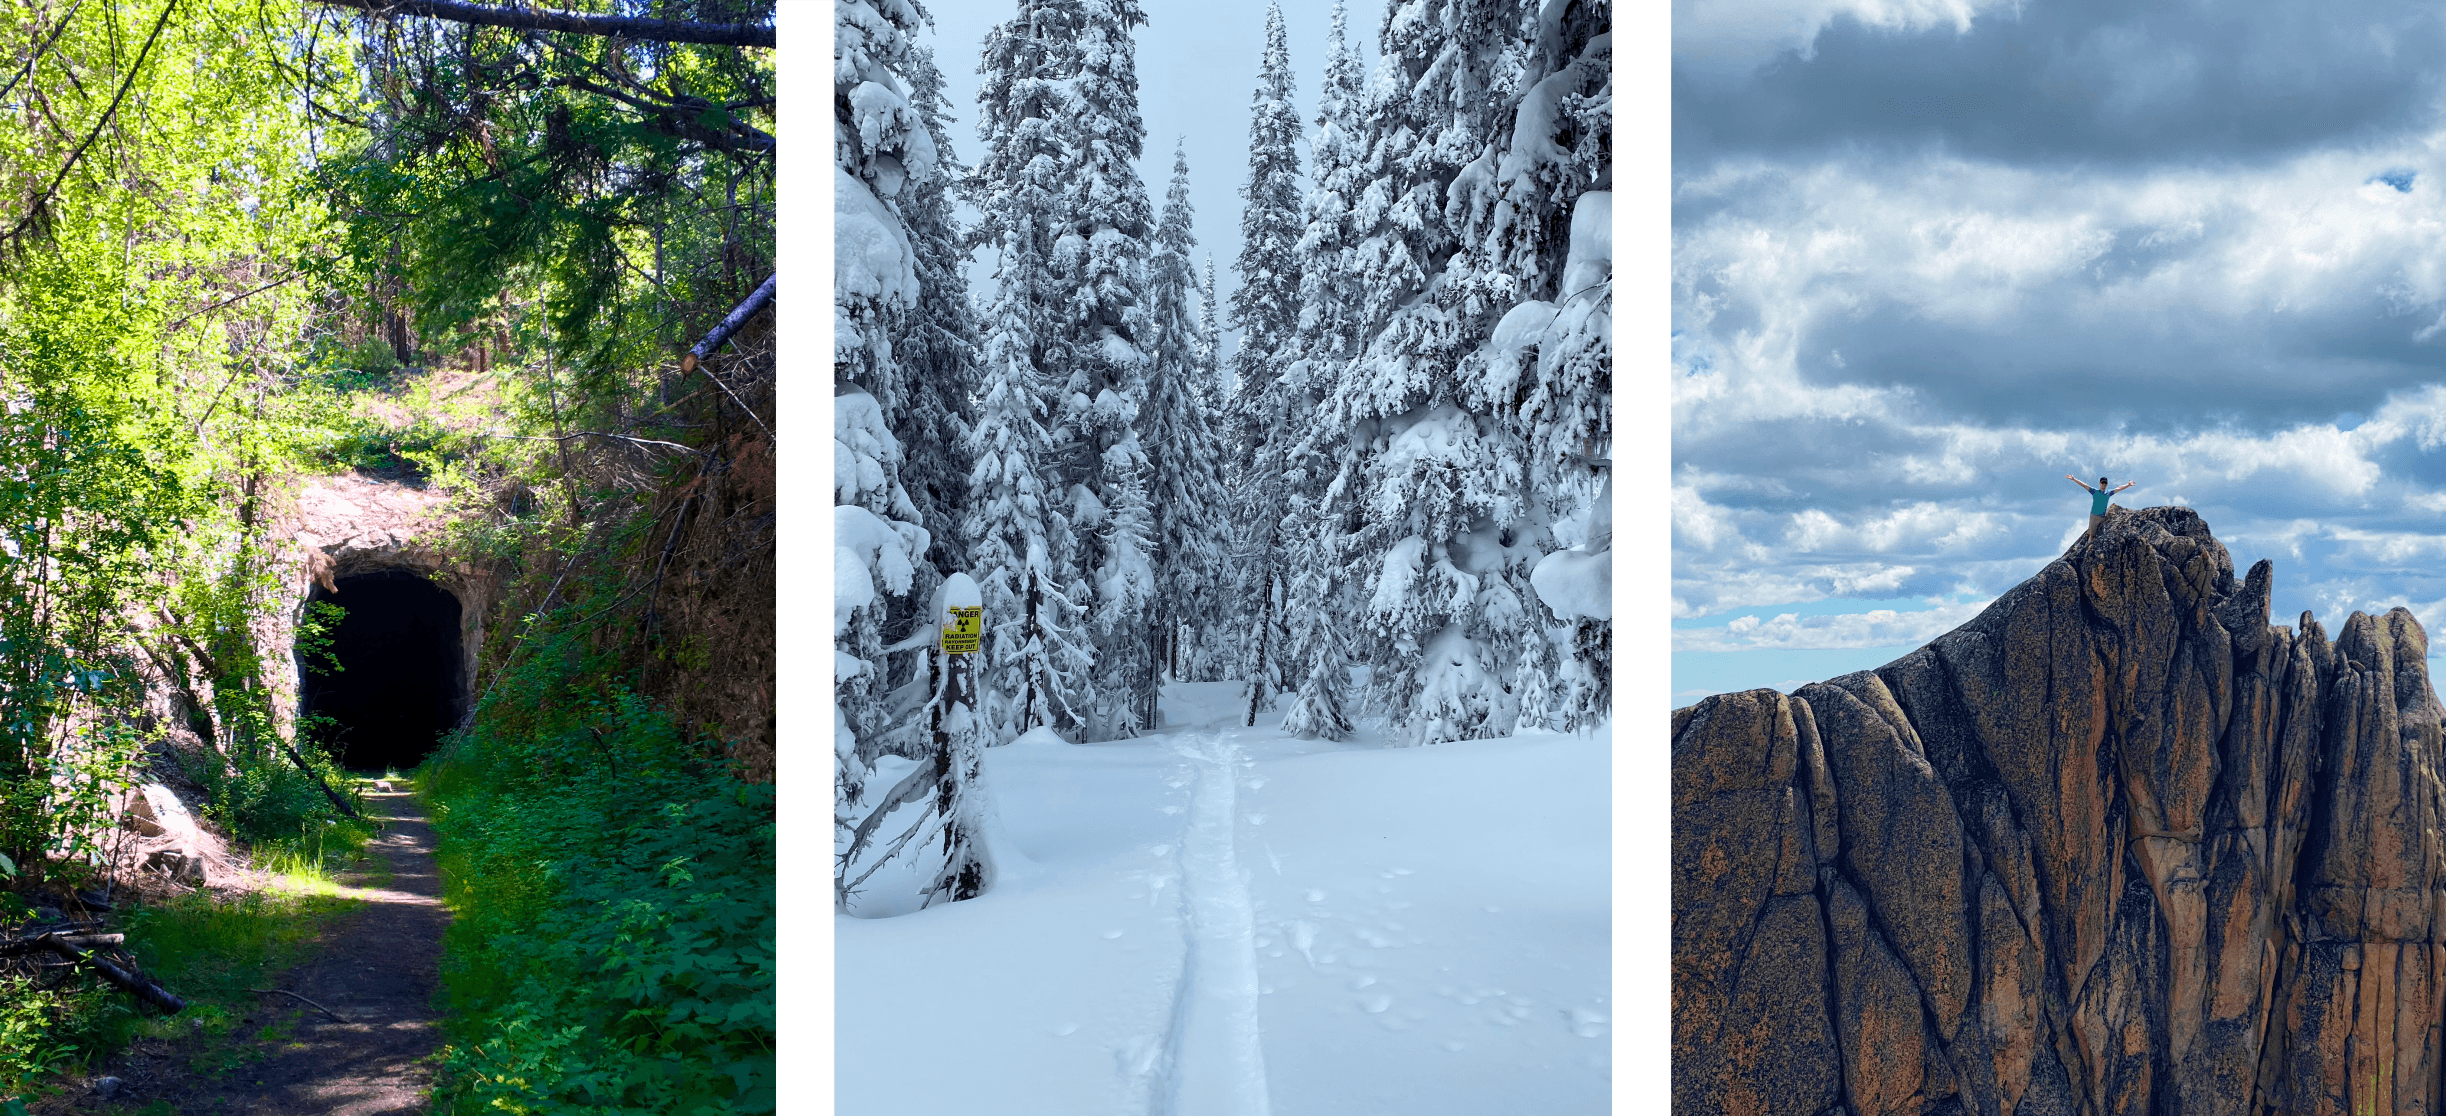 Images from biking, skiing, and hiking